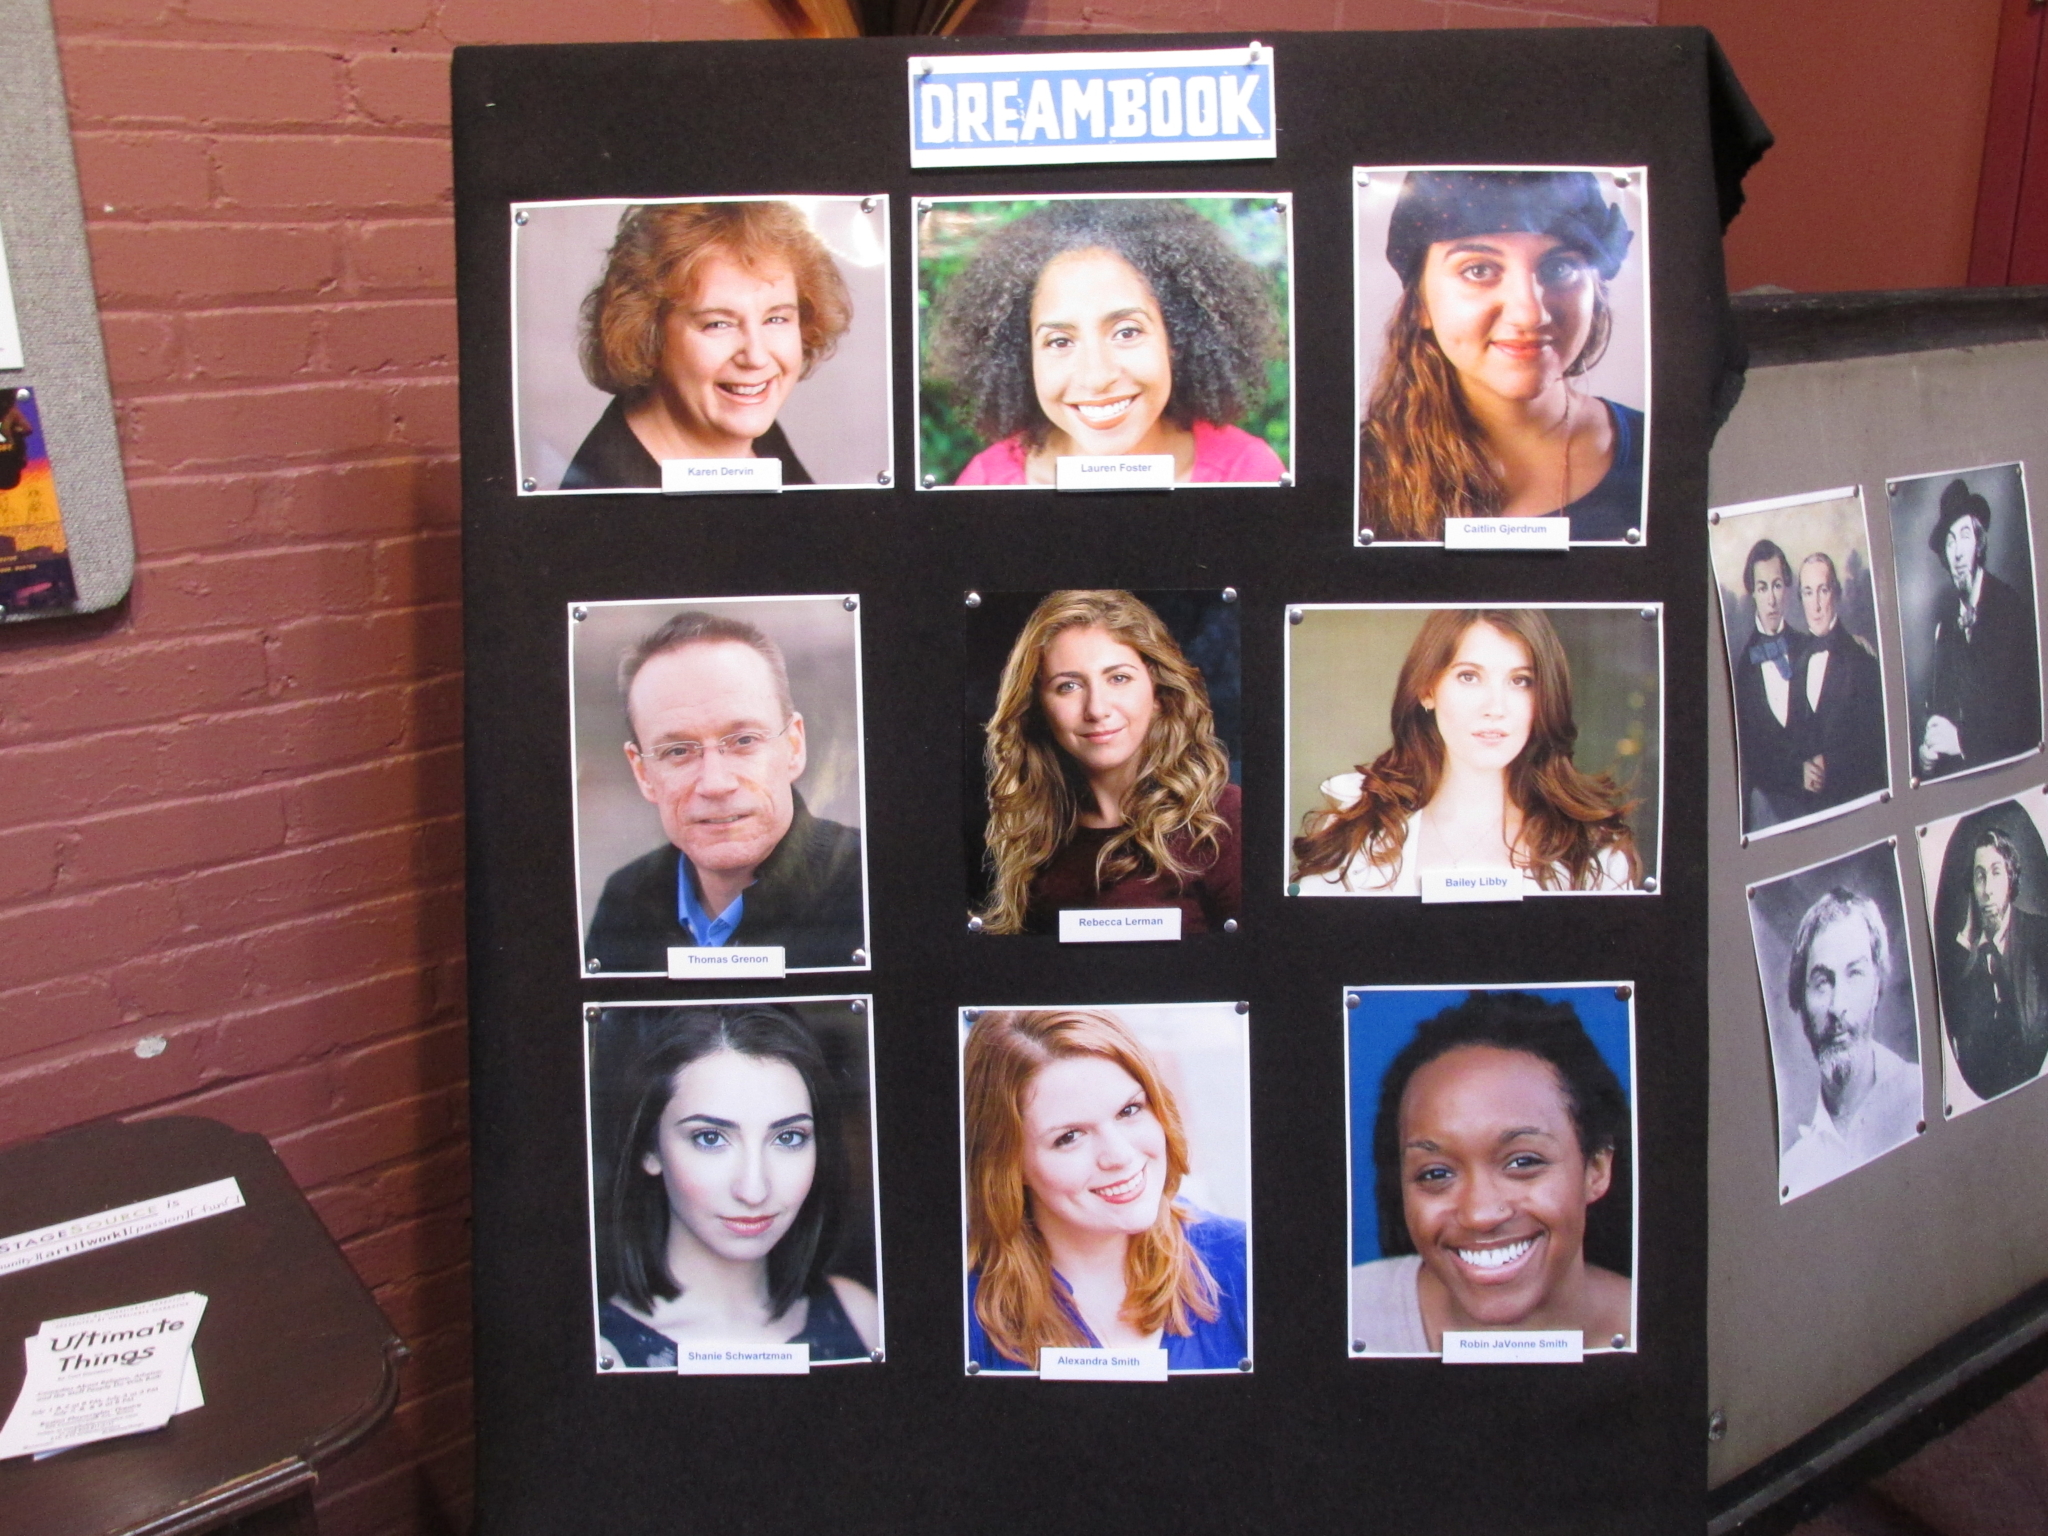 The nine-member cast of FPTC’s  production of “Dreambook” at the Theater entrance.